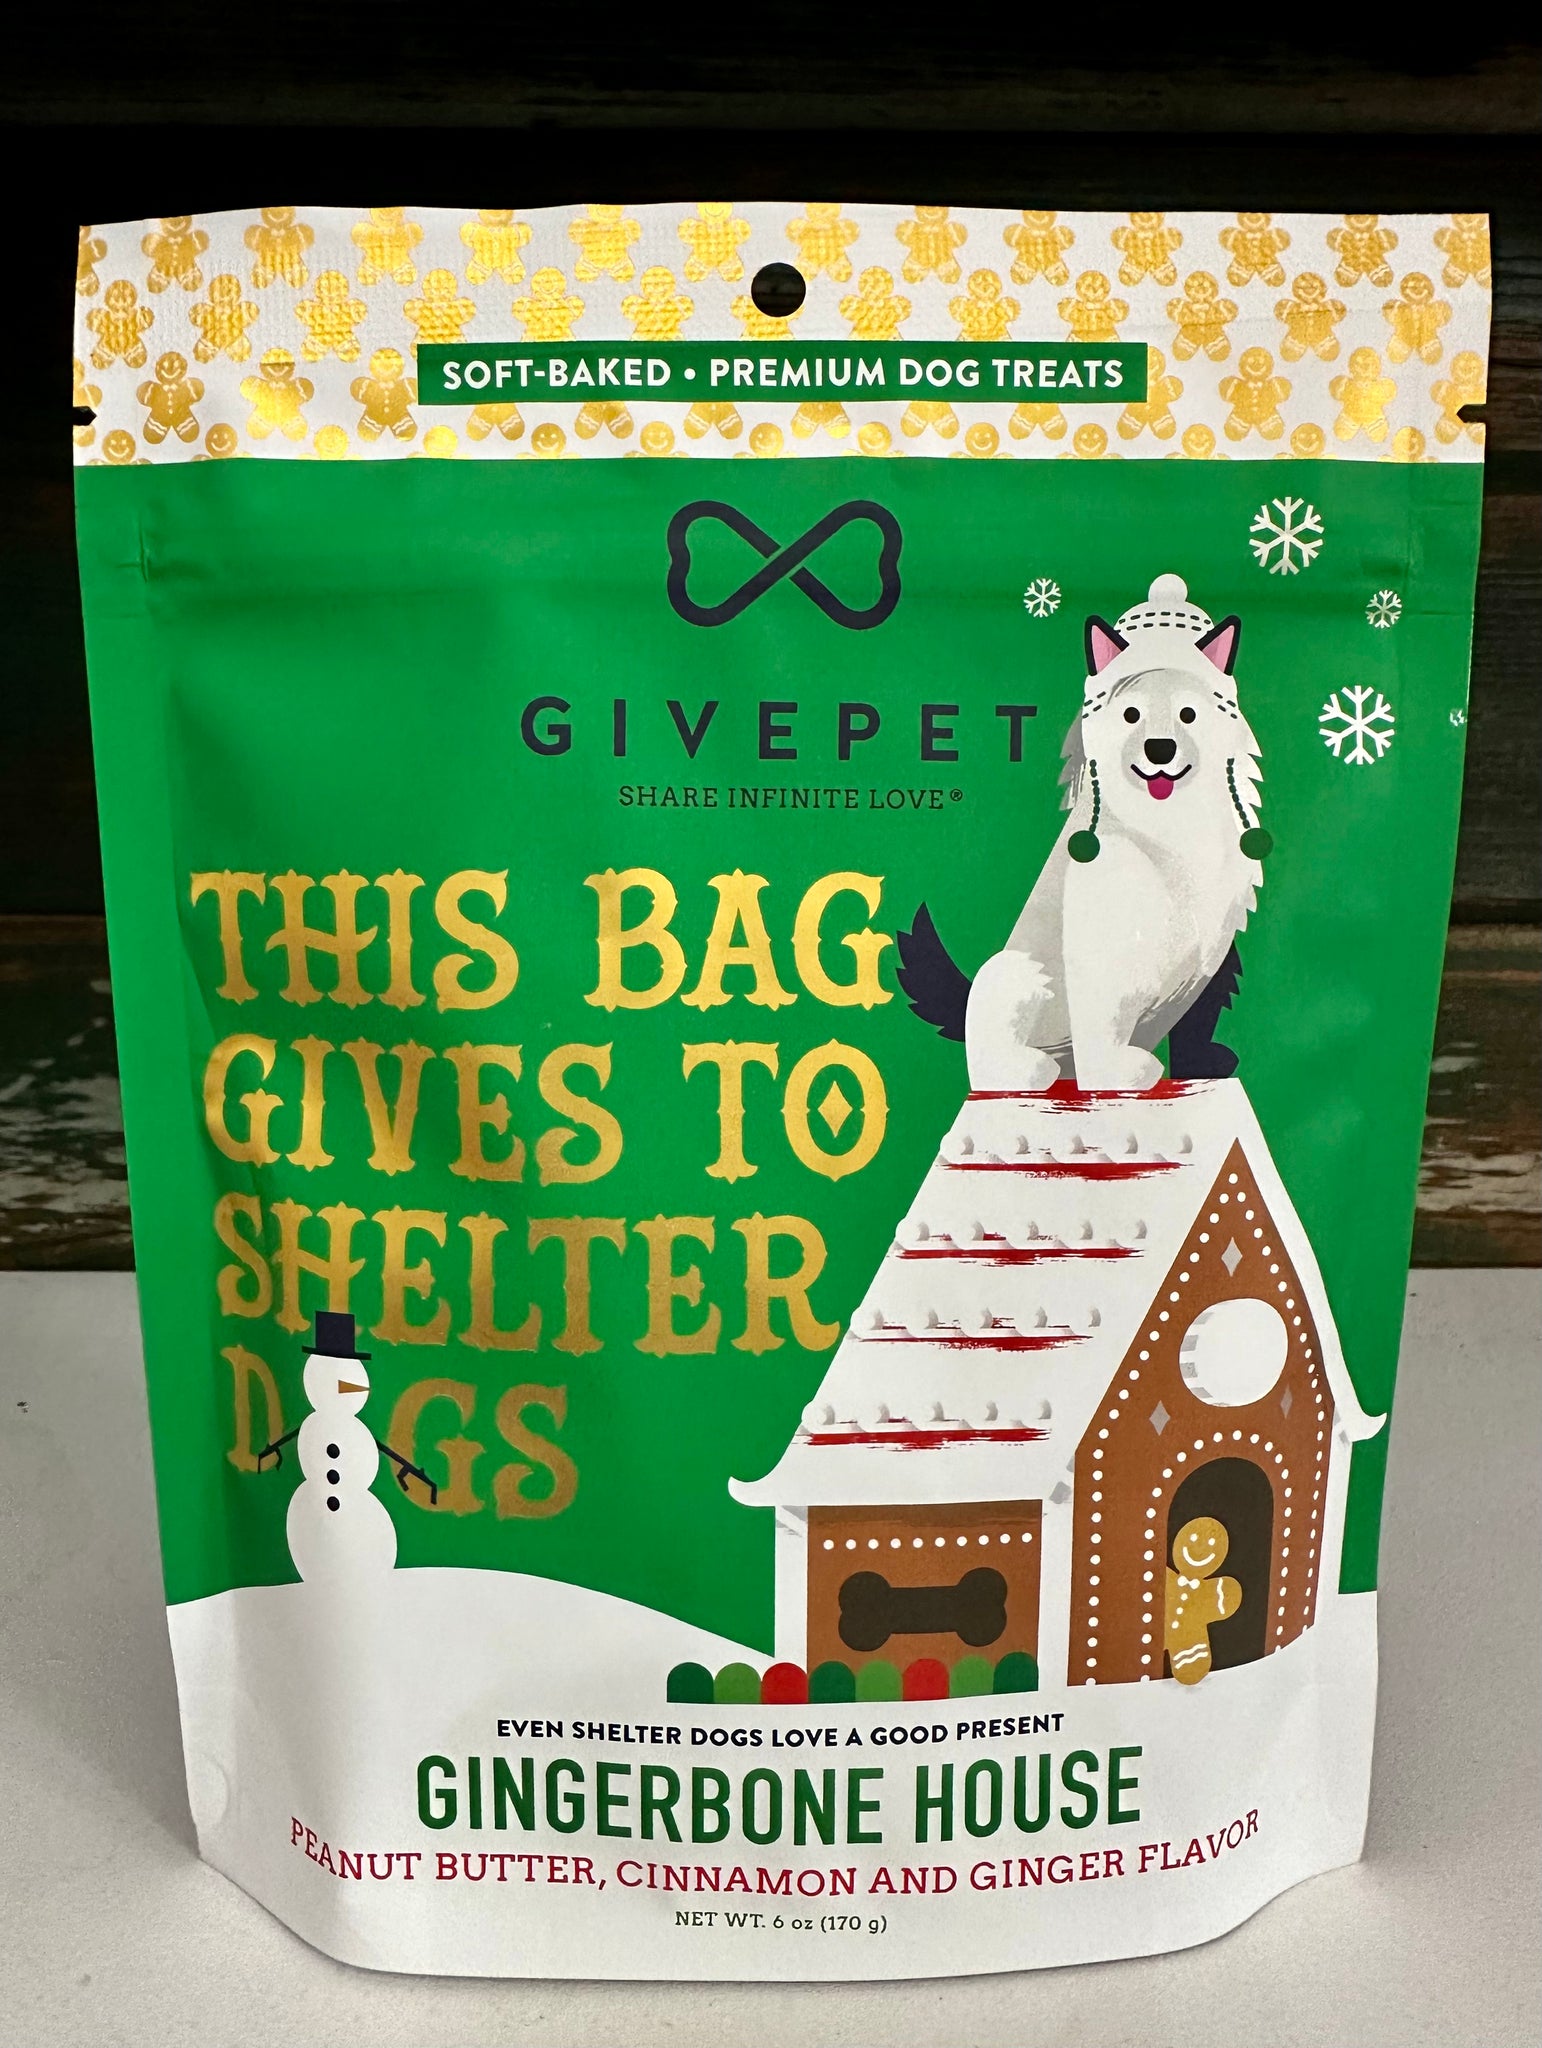 Givepet Holiday Dog Treat Soft/Chewy